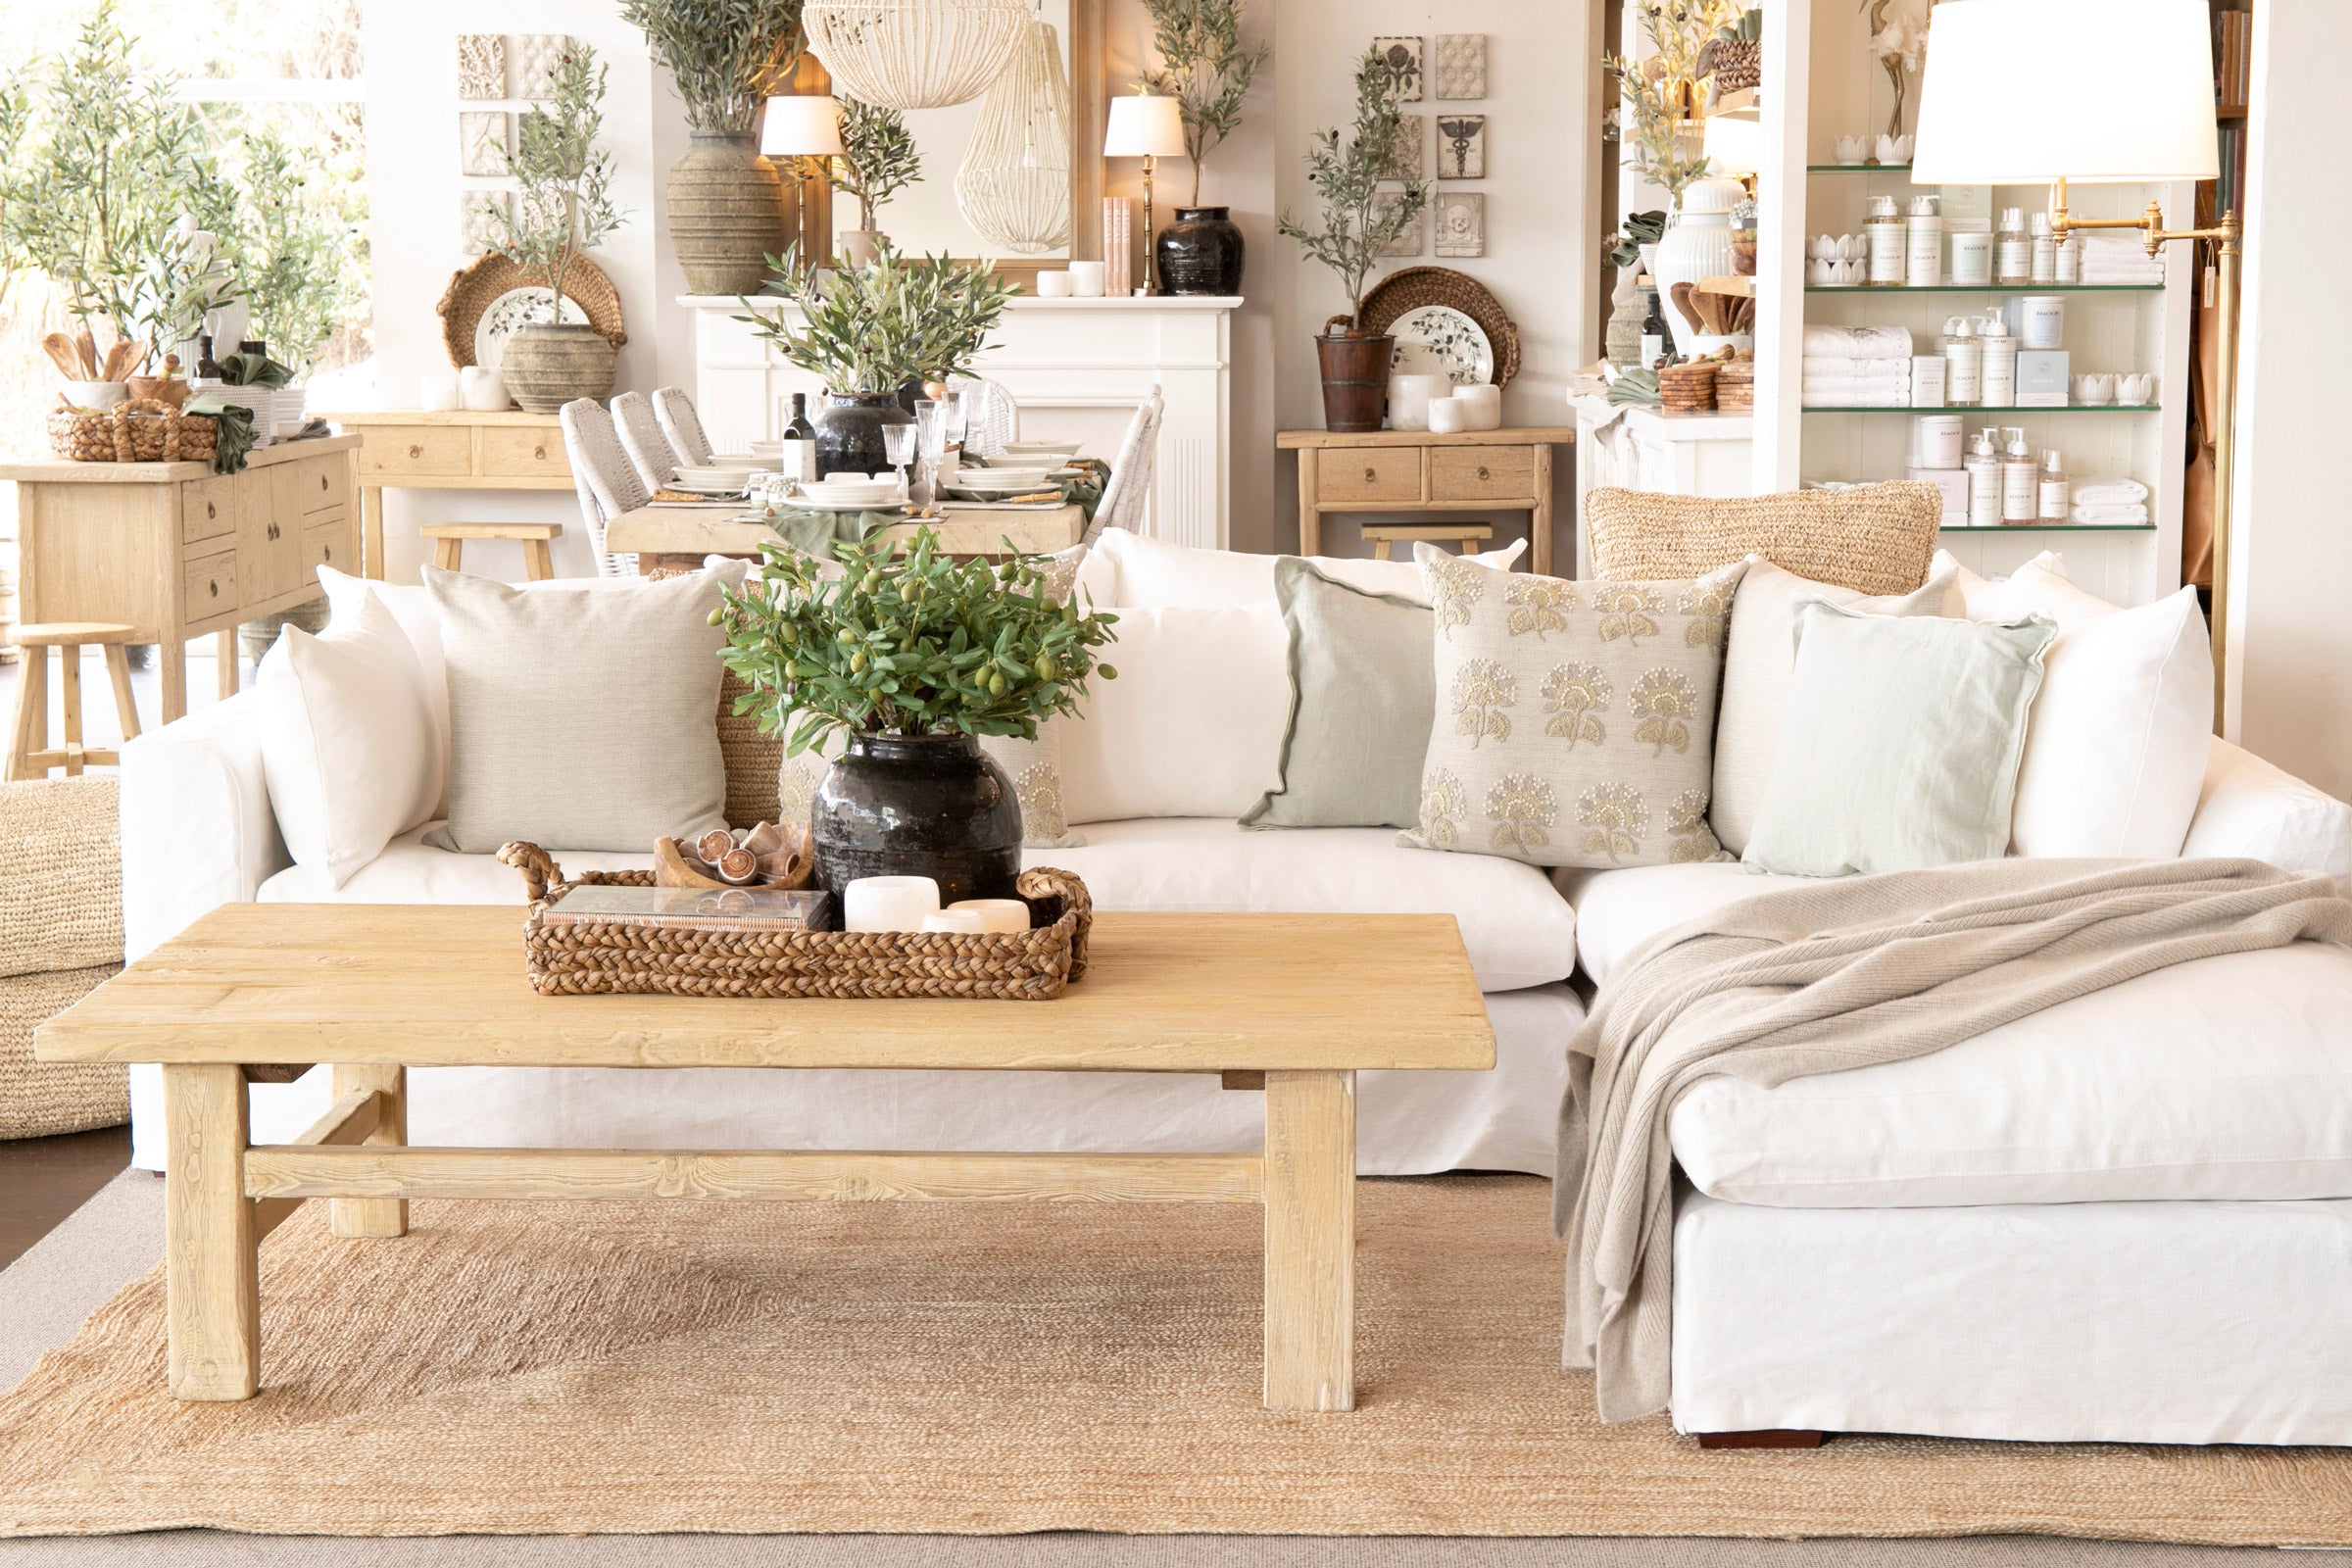 A living room display in our Collaroy store showing a lounge with soft green cushions and a raw elm coffee table.